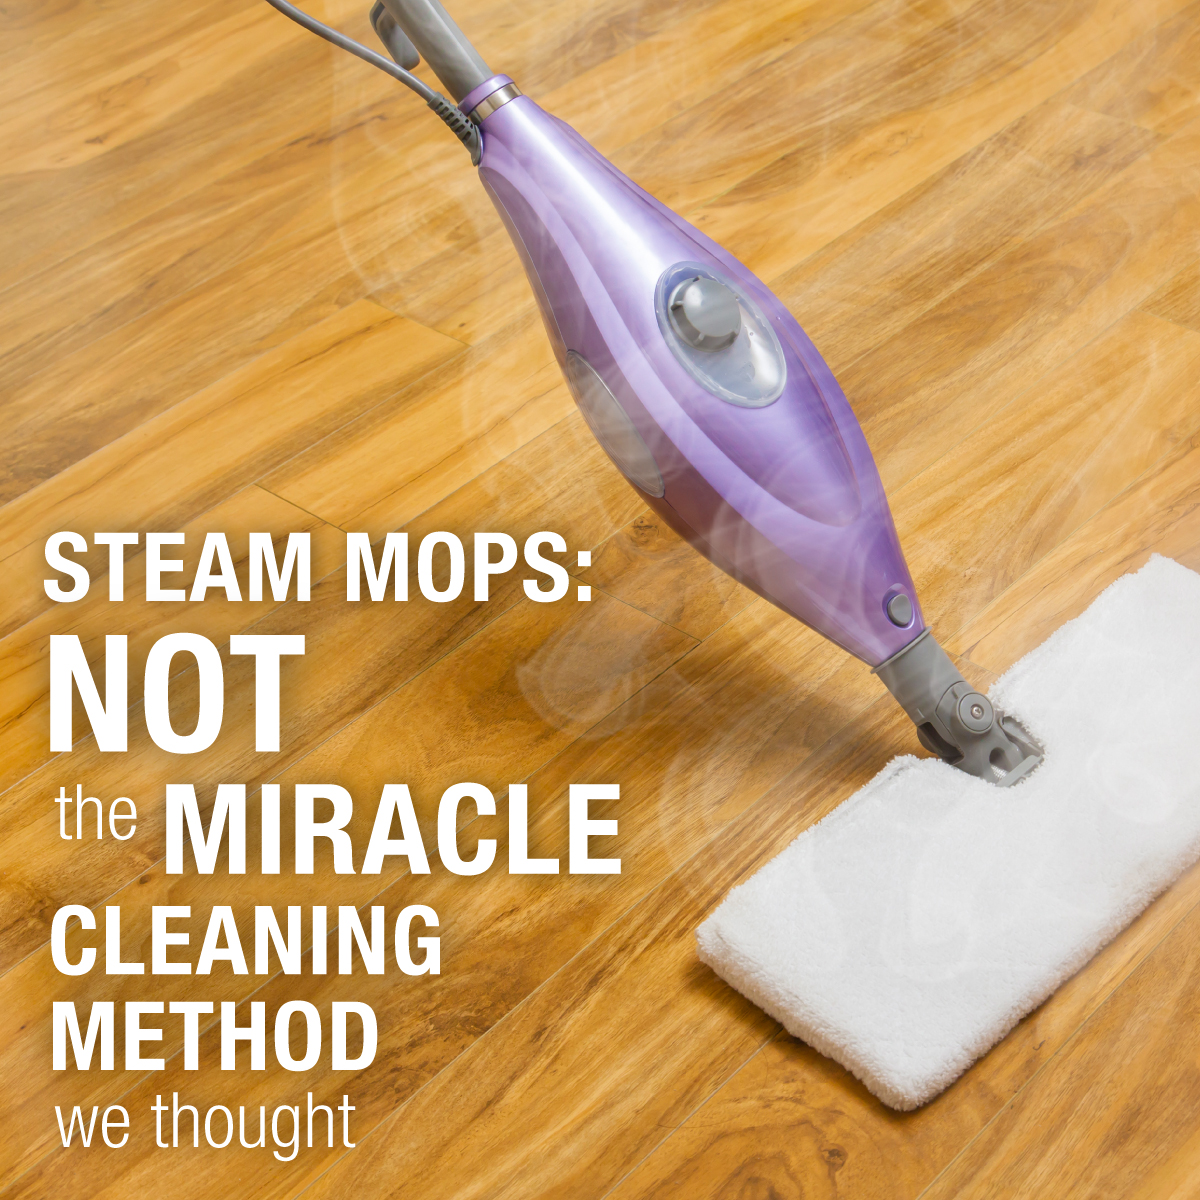 Steam Mops Not The Miracle Cleaning, Can Steam Mops Be Used On Vinyl Floors